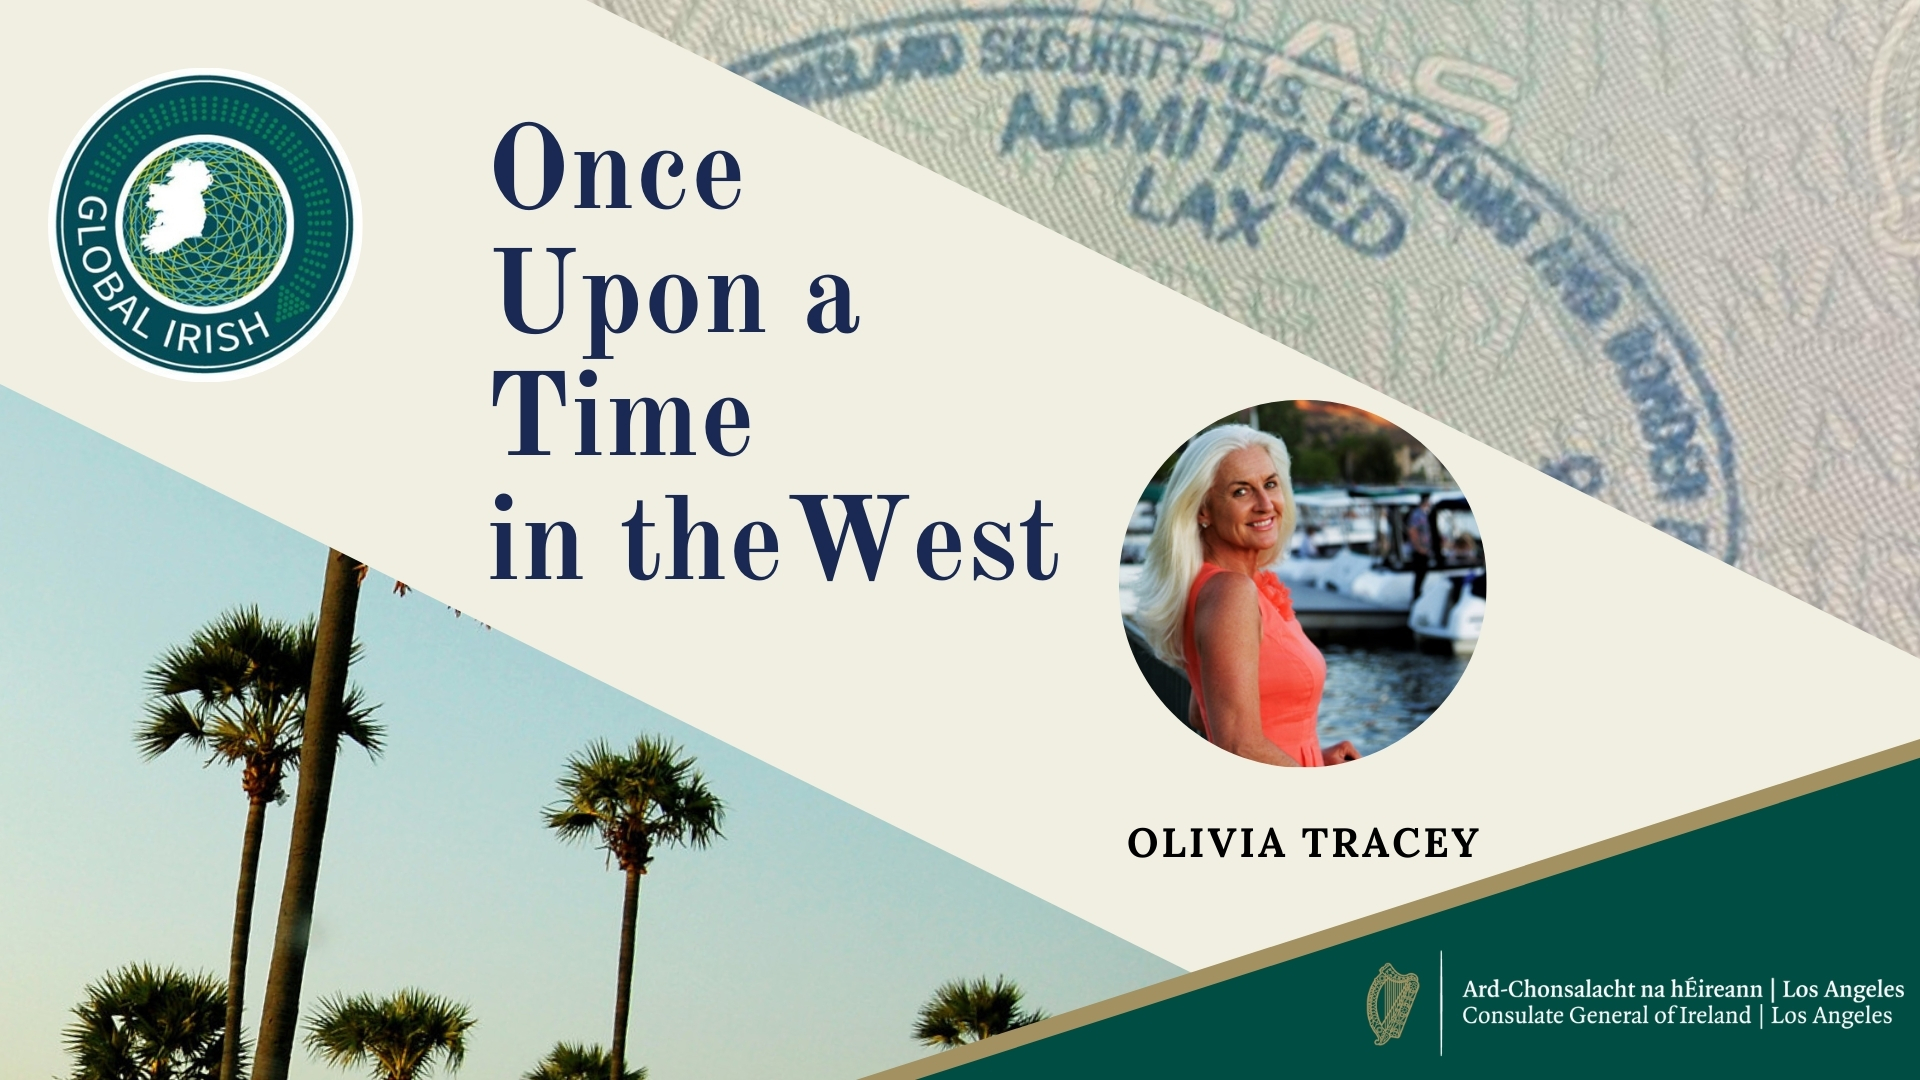 Interview with Olivia Tracey